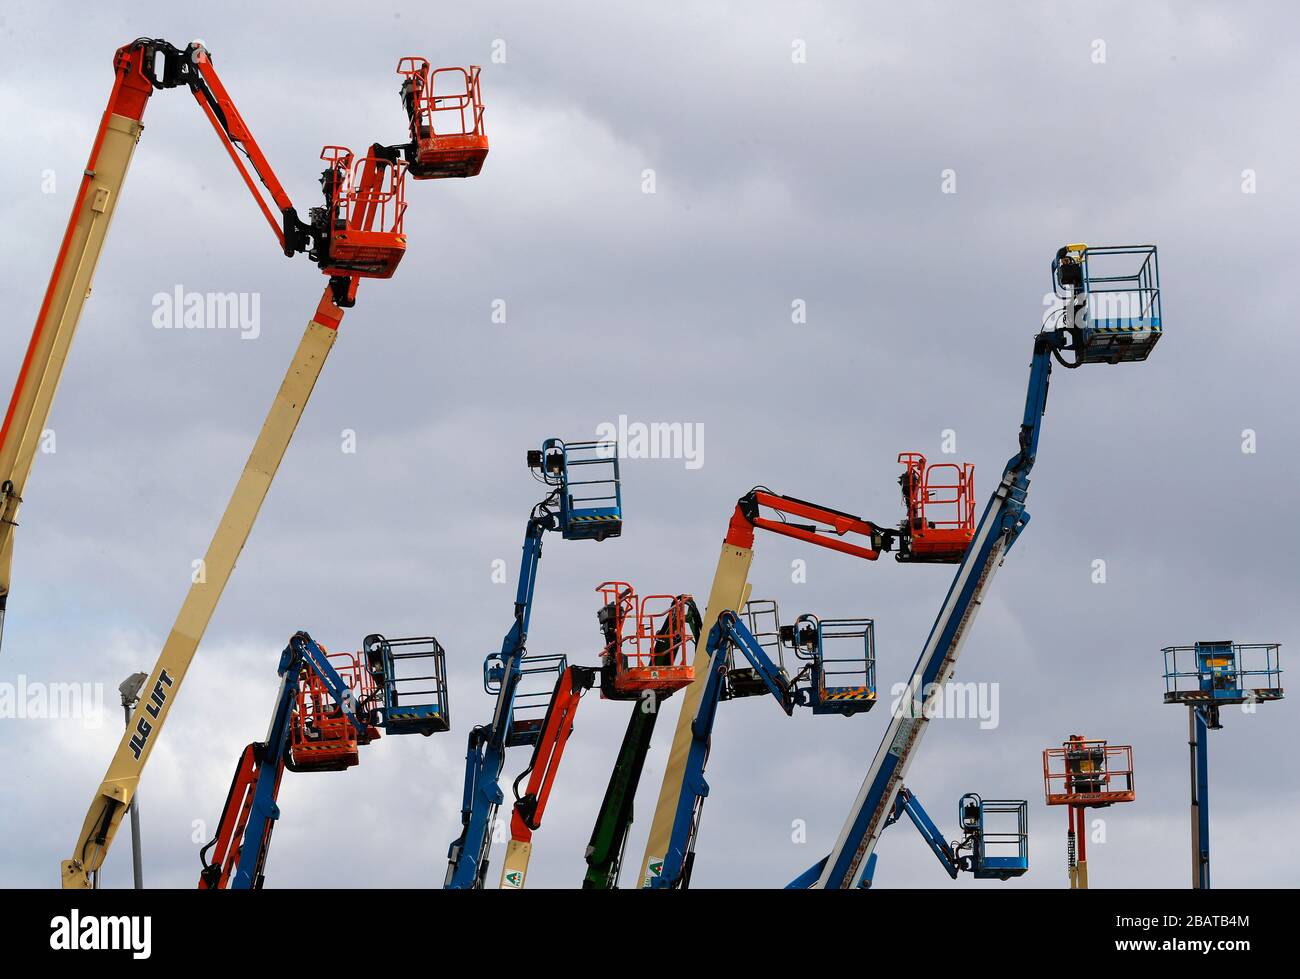 Nottingham, Nottinghamshire, UK. 29th March 2020. Cherry pickers stand in the yard of the A-Plant tool and equipment hire company in Nottingham. Credi Stock Photo